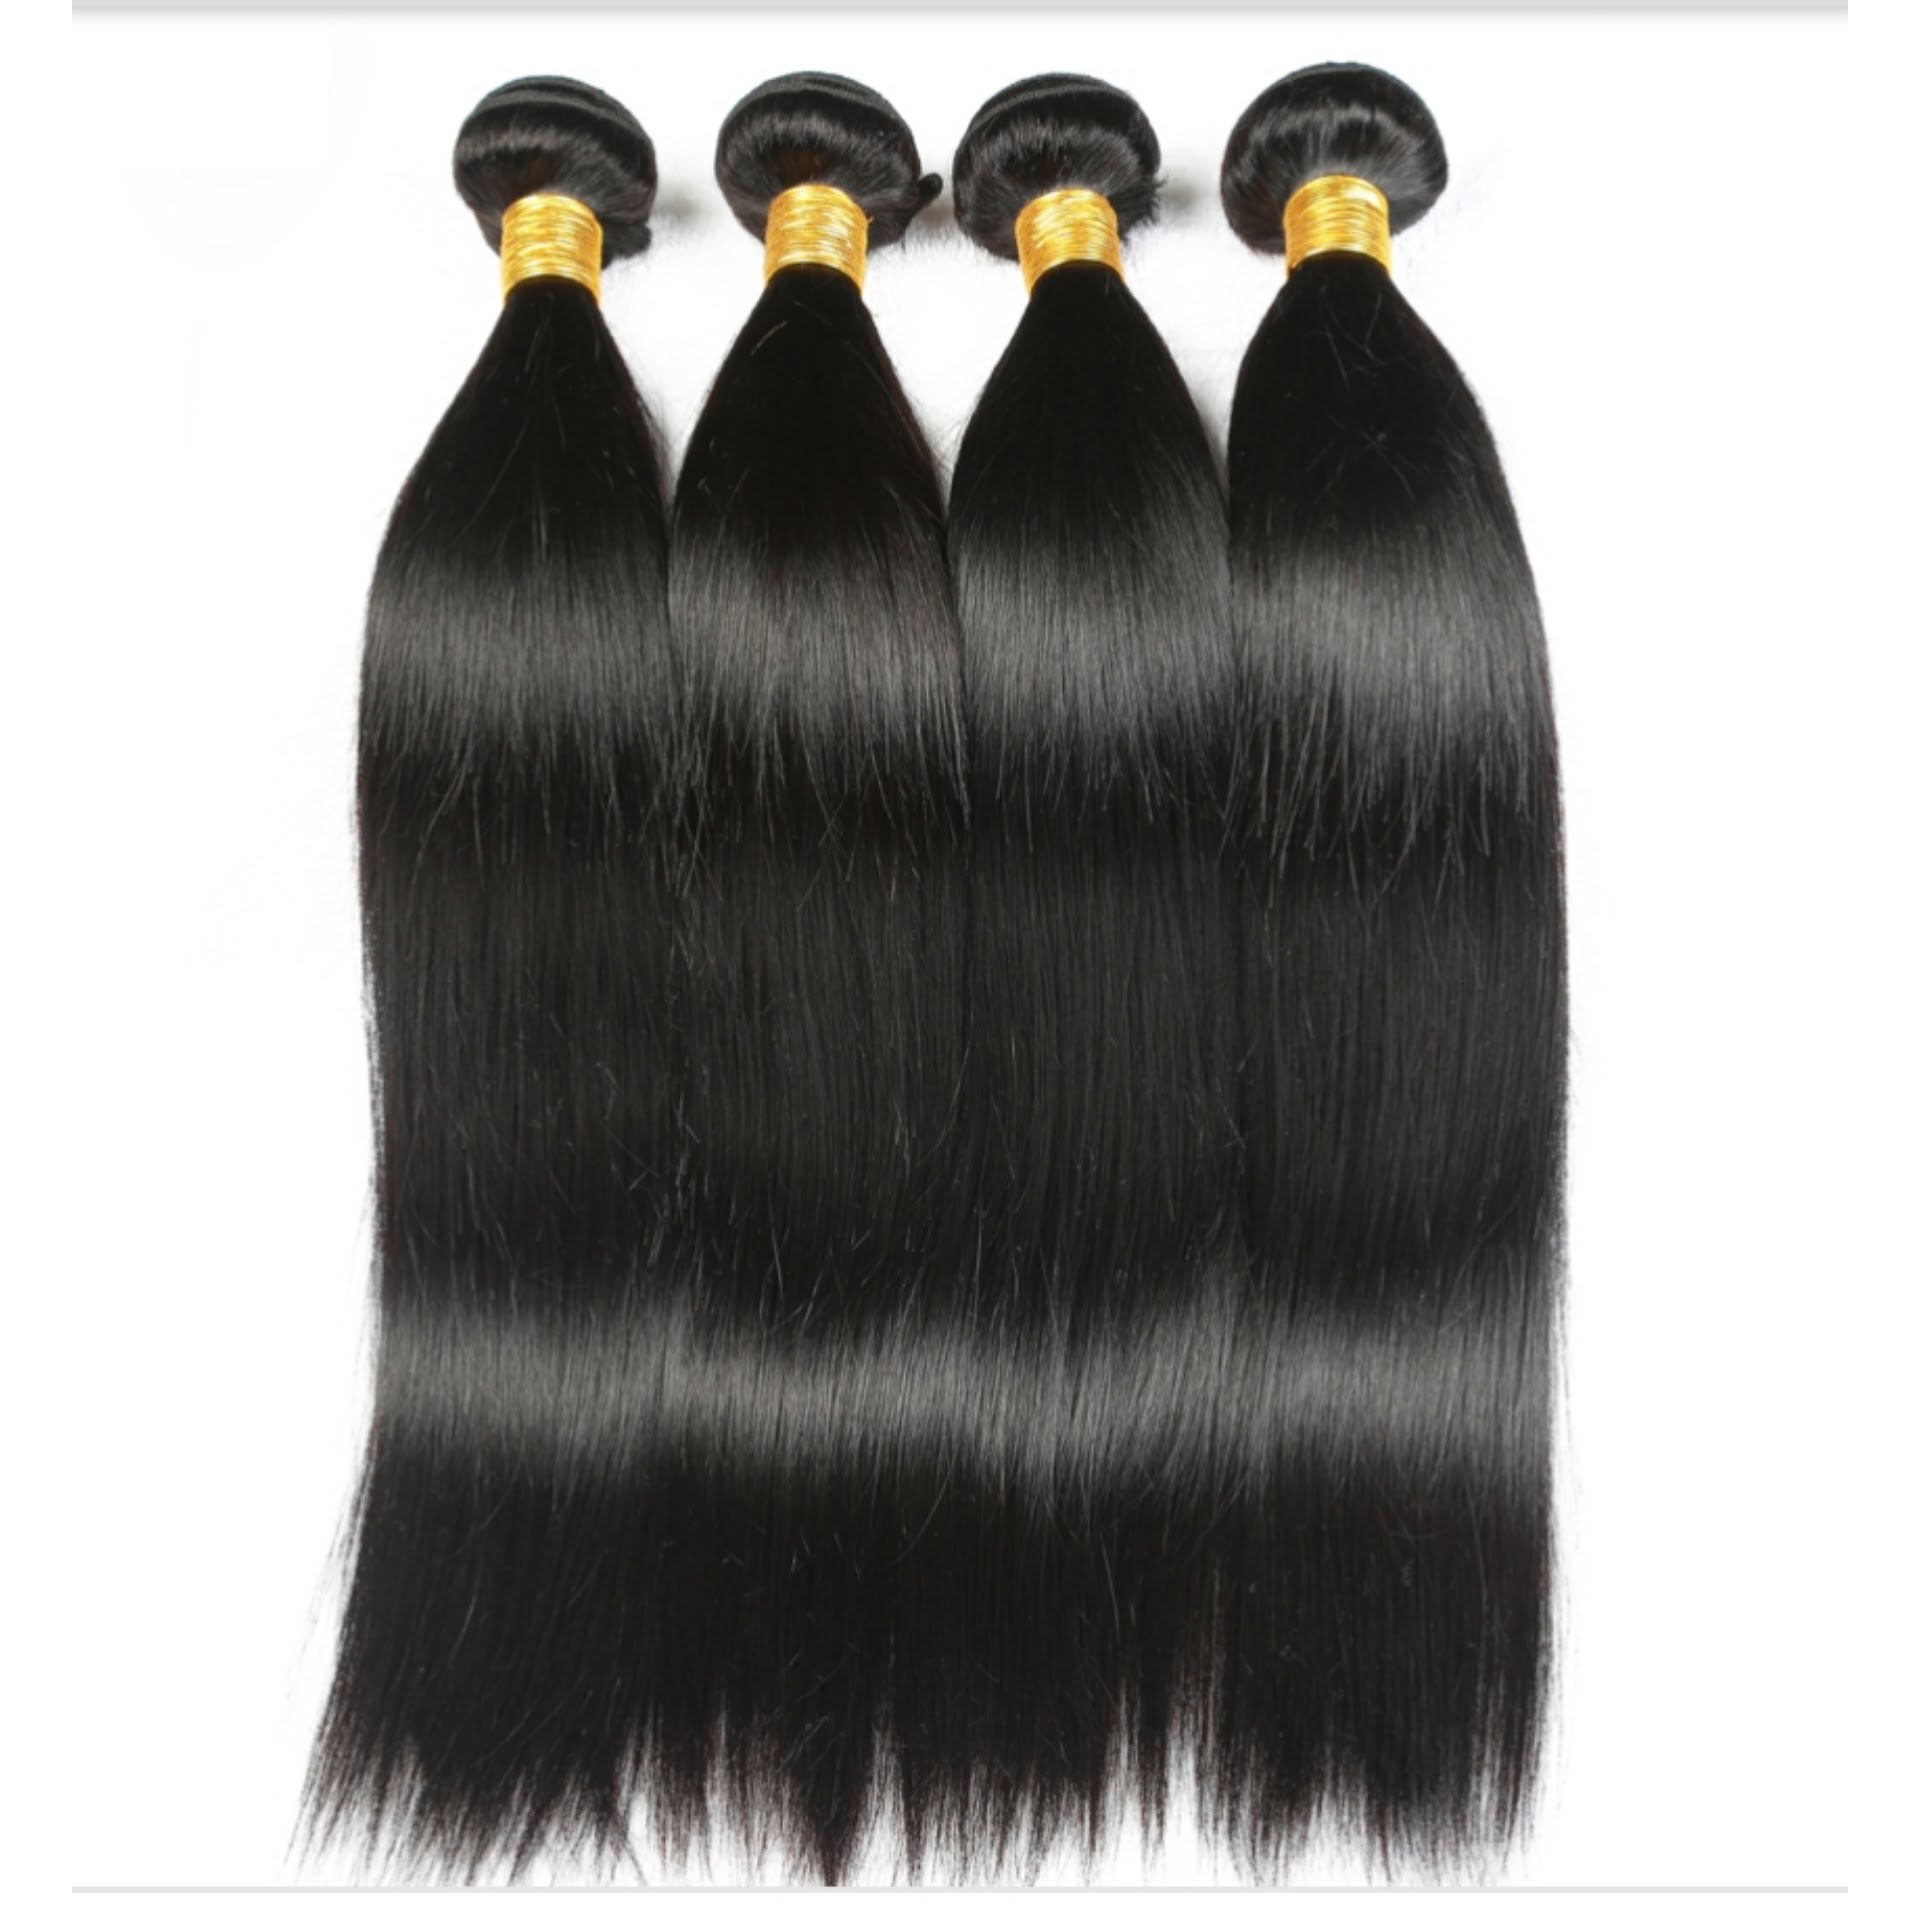 HUMAN HAIR WIGS AND EXTENTIONS Archives - Buy and Slay